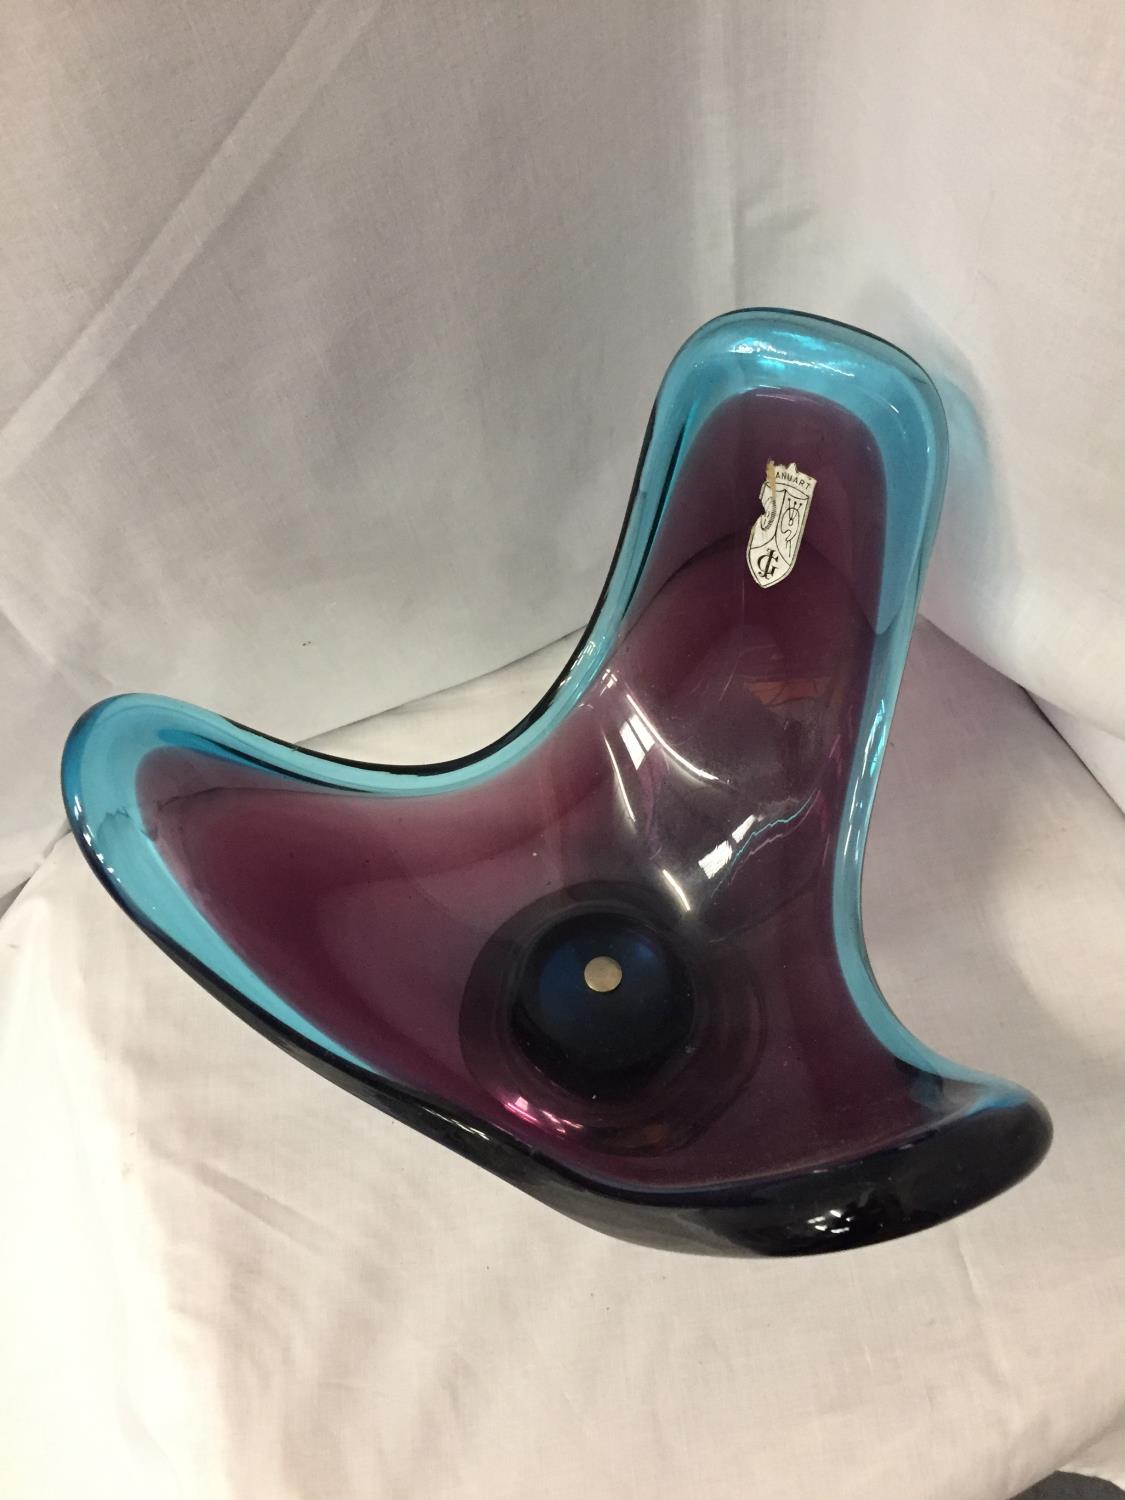 A PURPLE AND TURQUOISE GLASS ABSTRACT DESIGN DISH ON A WHITE METAL STAND - Image 3 of 3